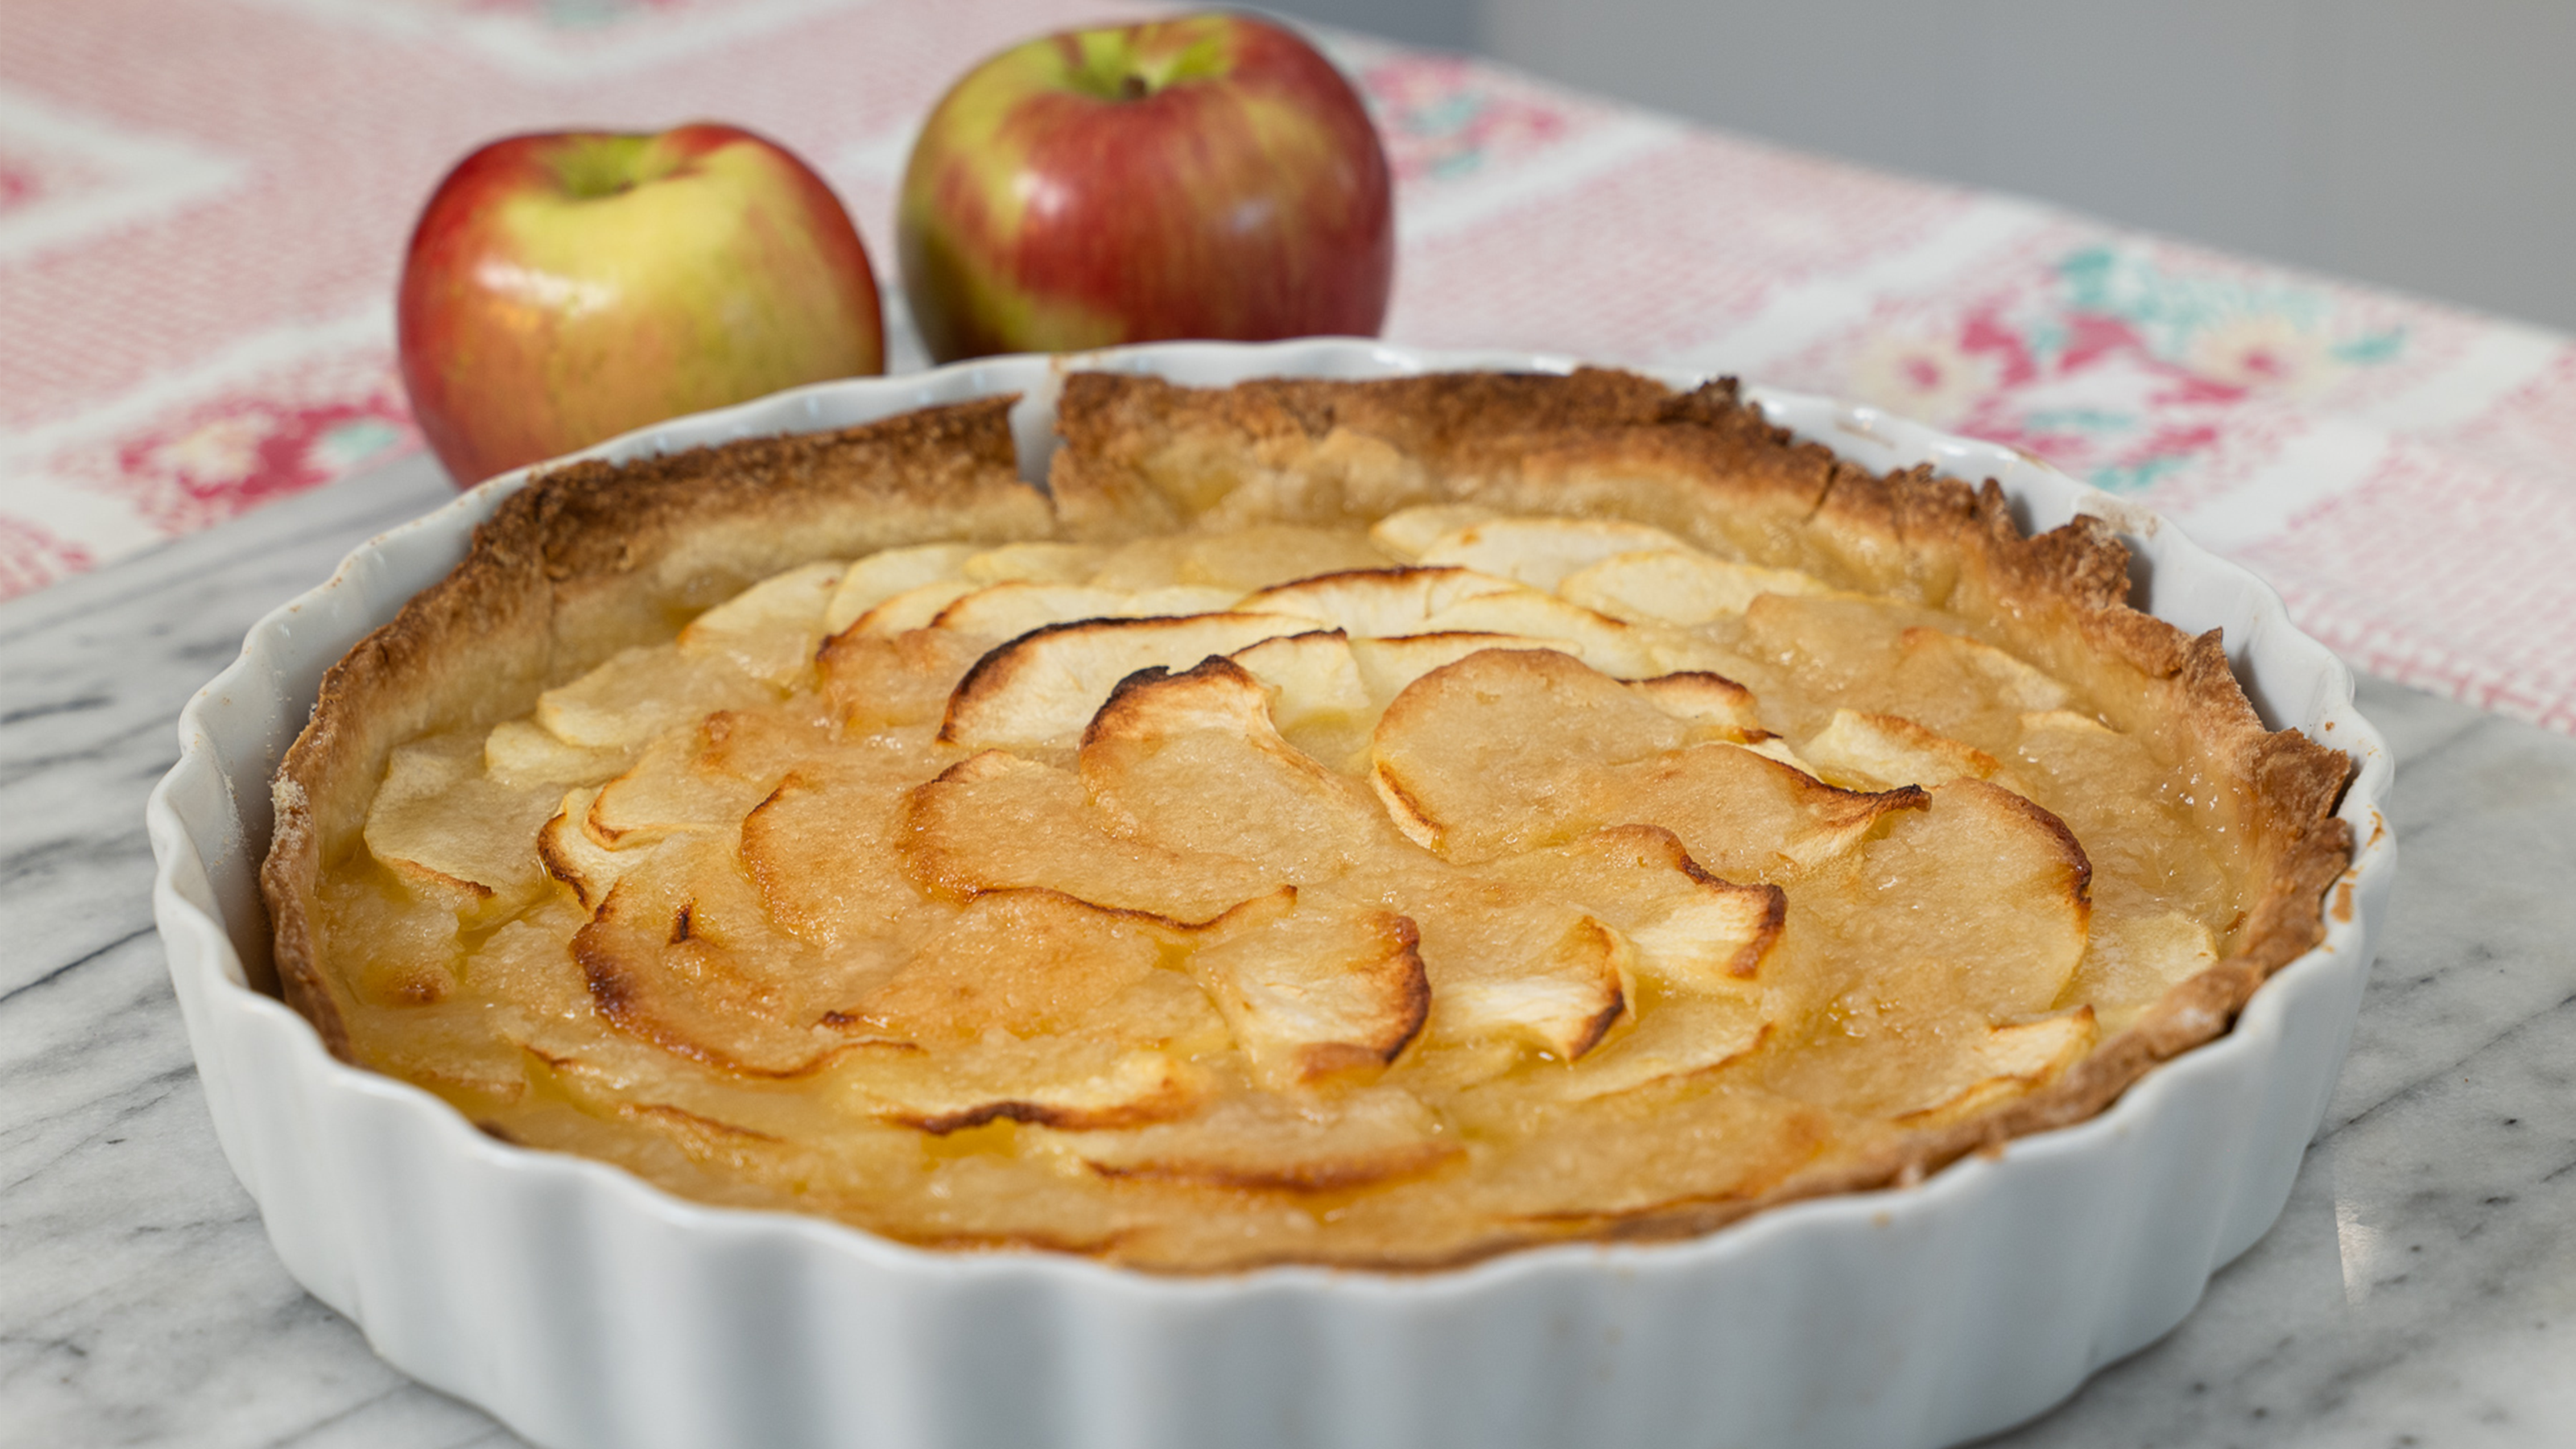 A dessert for all seasons: Inga Witscher’s delectable apple tarte